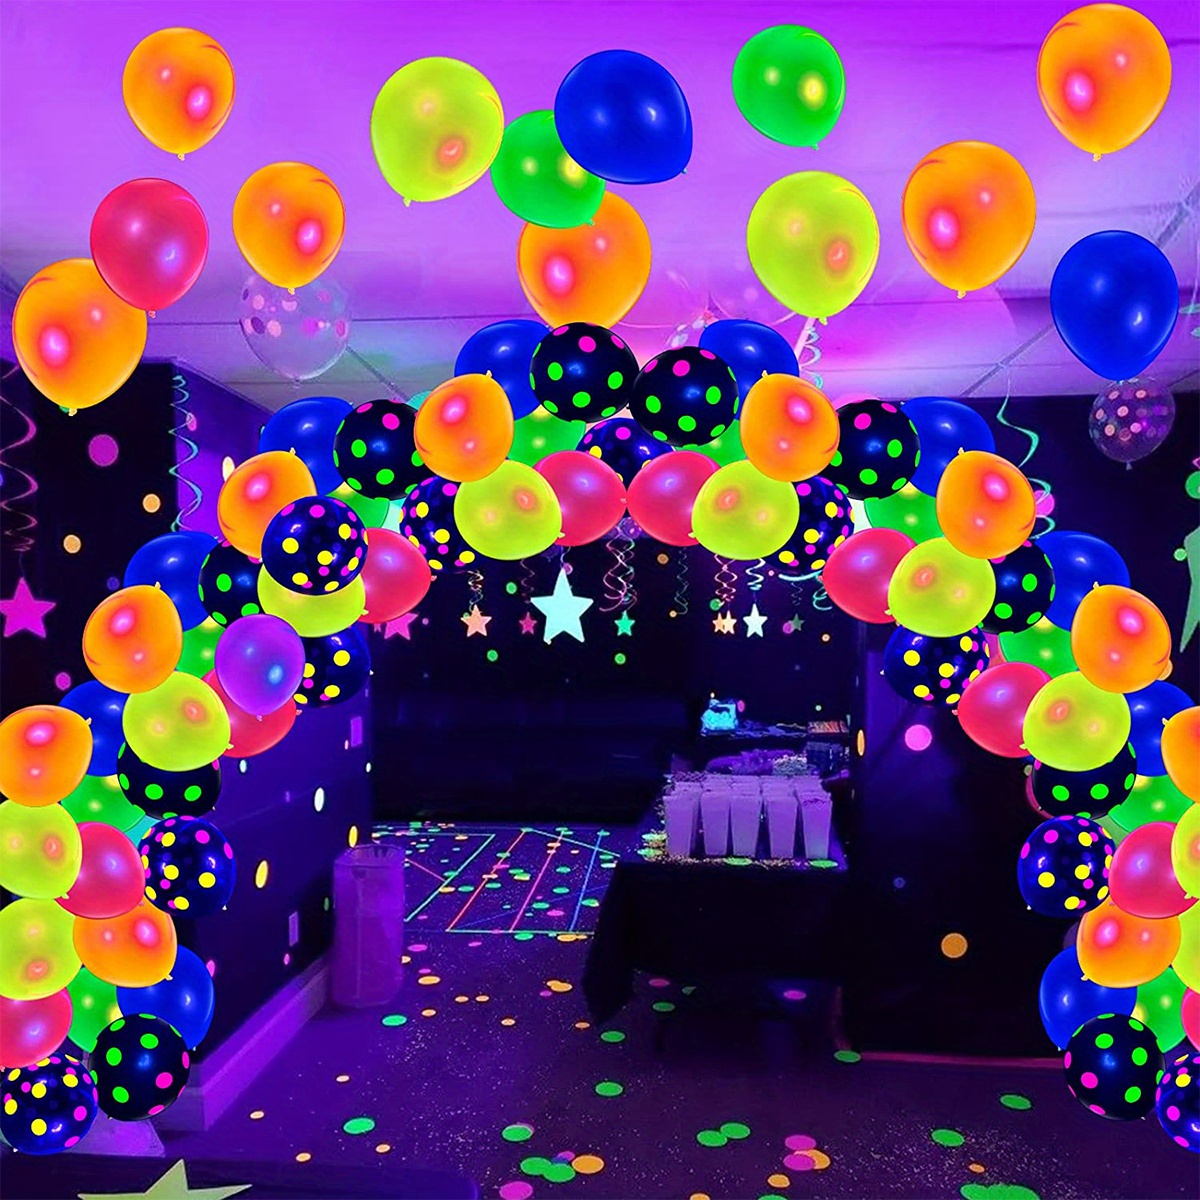 Neon Party Supplies Set, 6 Colors 16.4ft UV Blacklight Reactive Tape, Neon  Paper Garlands Circle Hanging Decorations for Birthday Wedding Glow Party  Decorations 